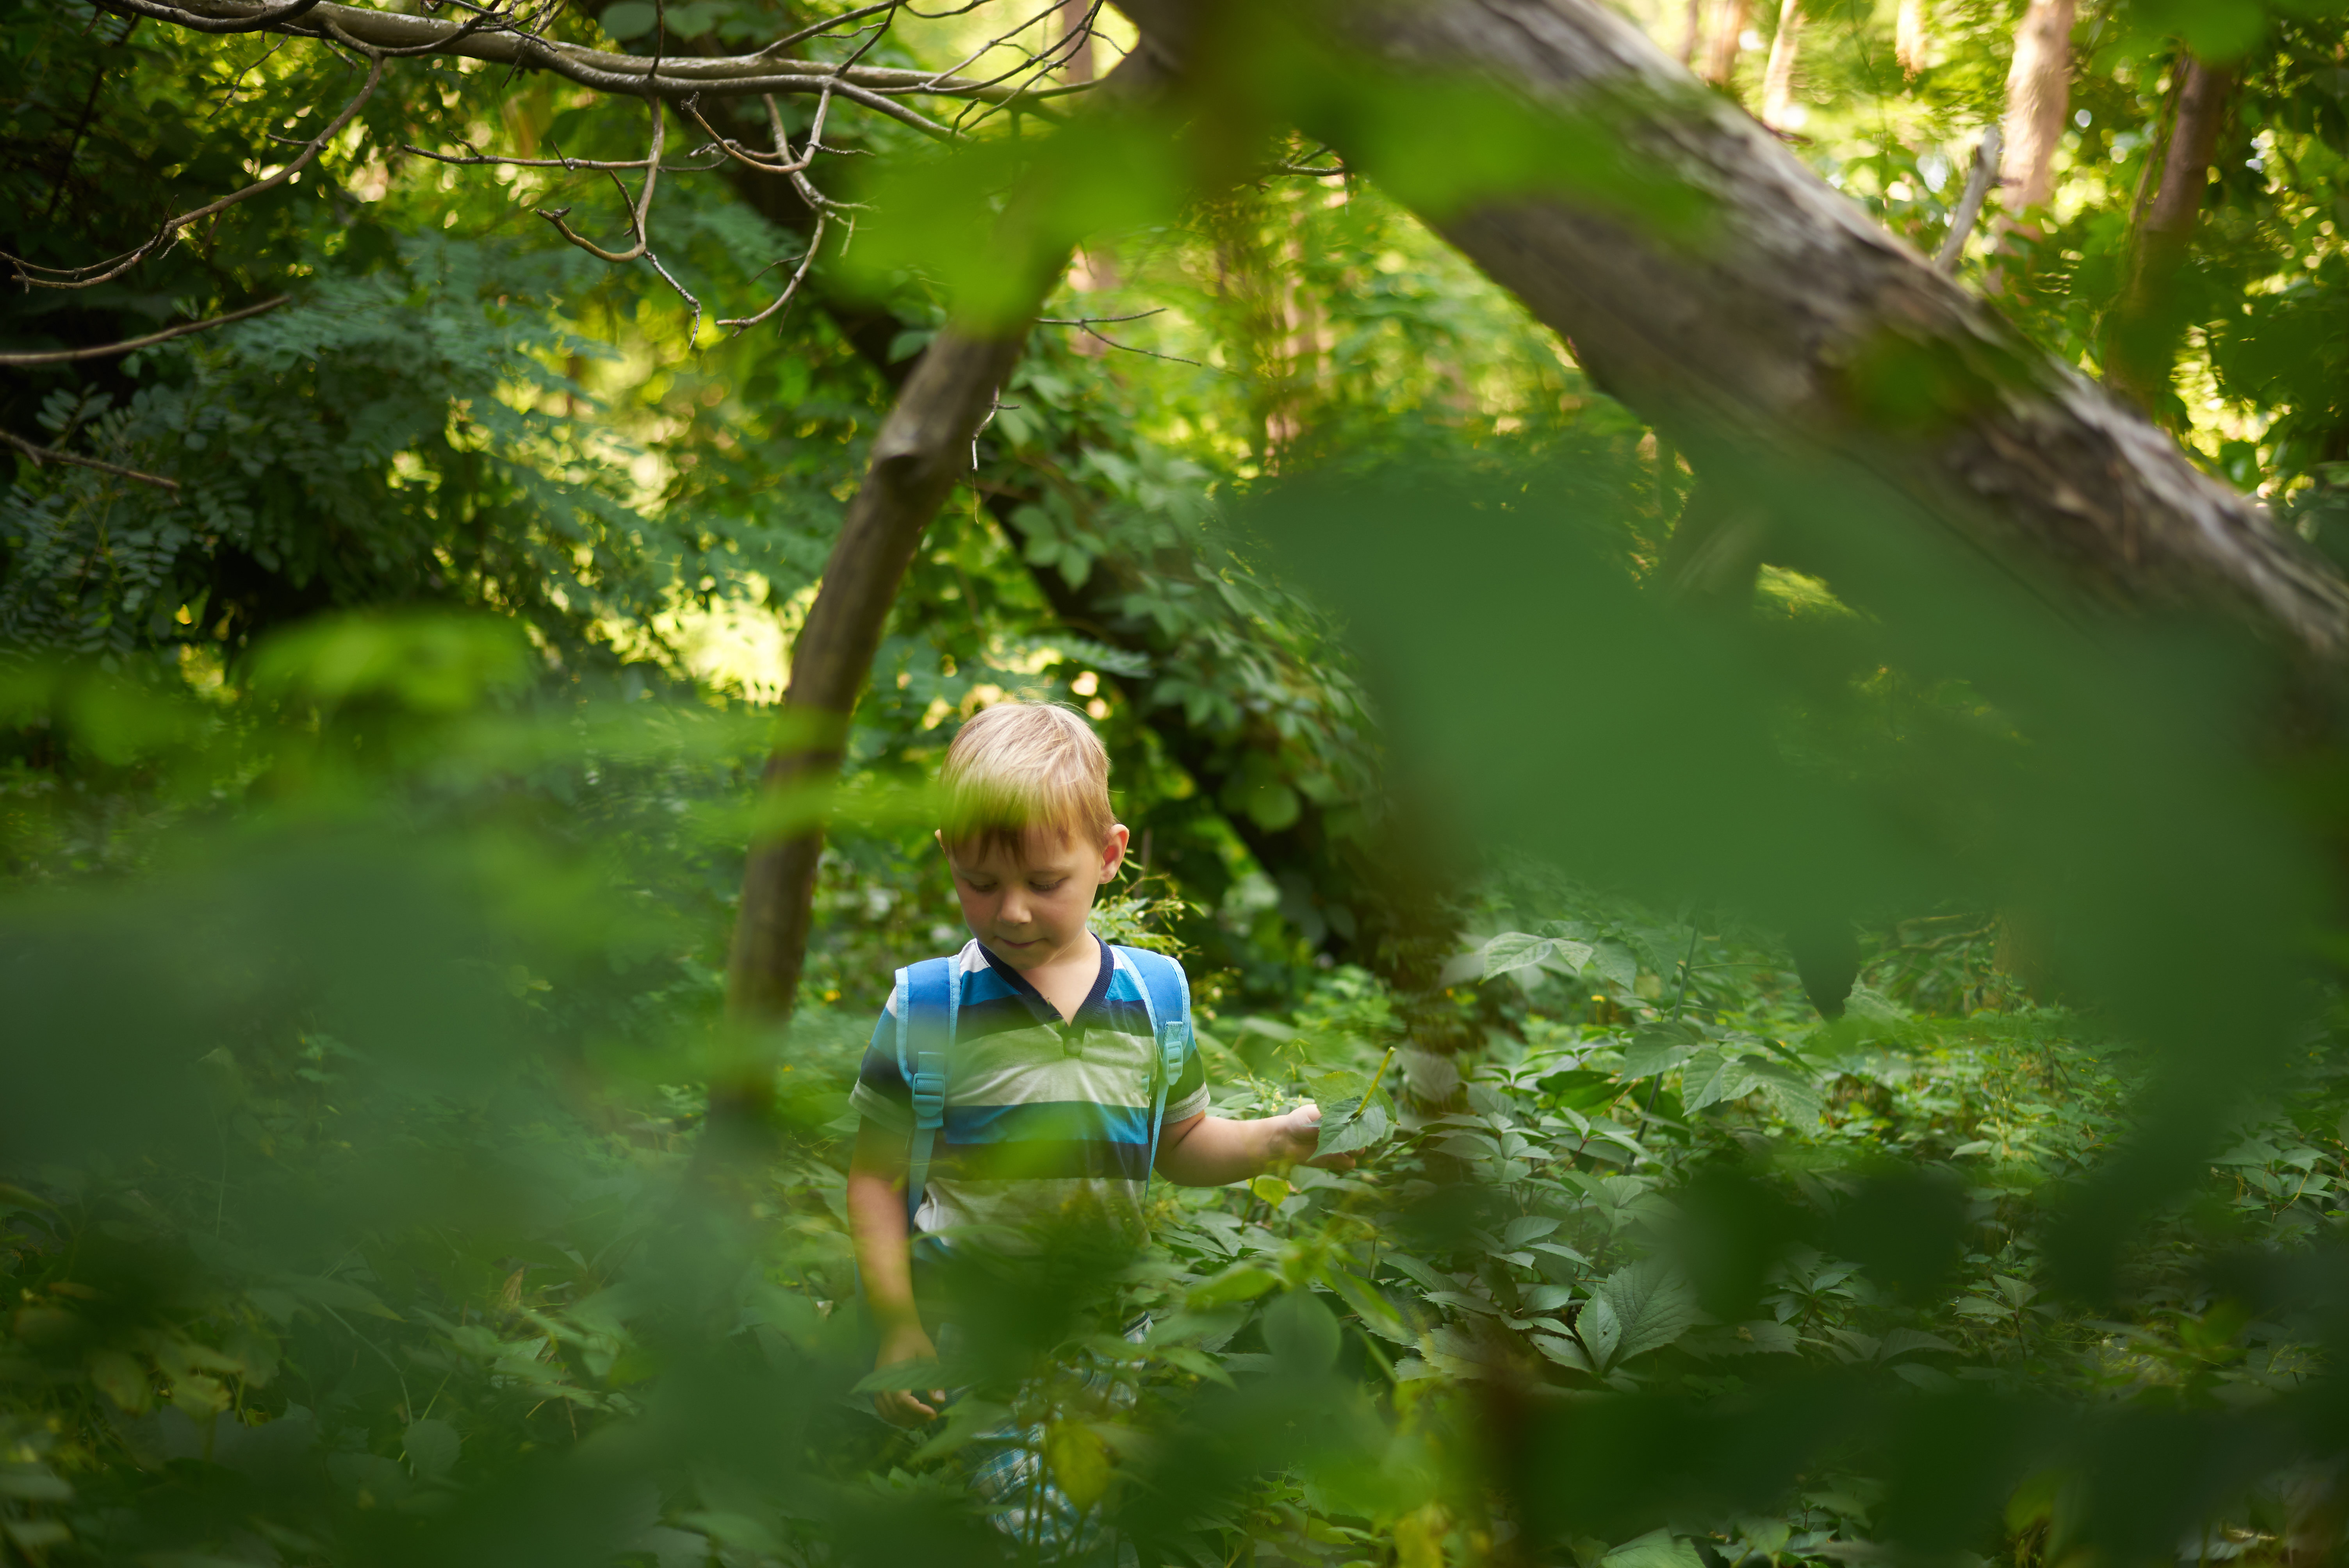 A young boy is visible through the leaves of trees